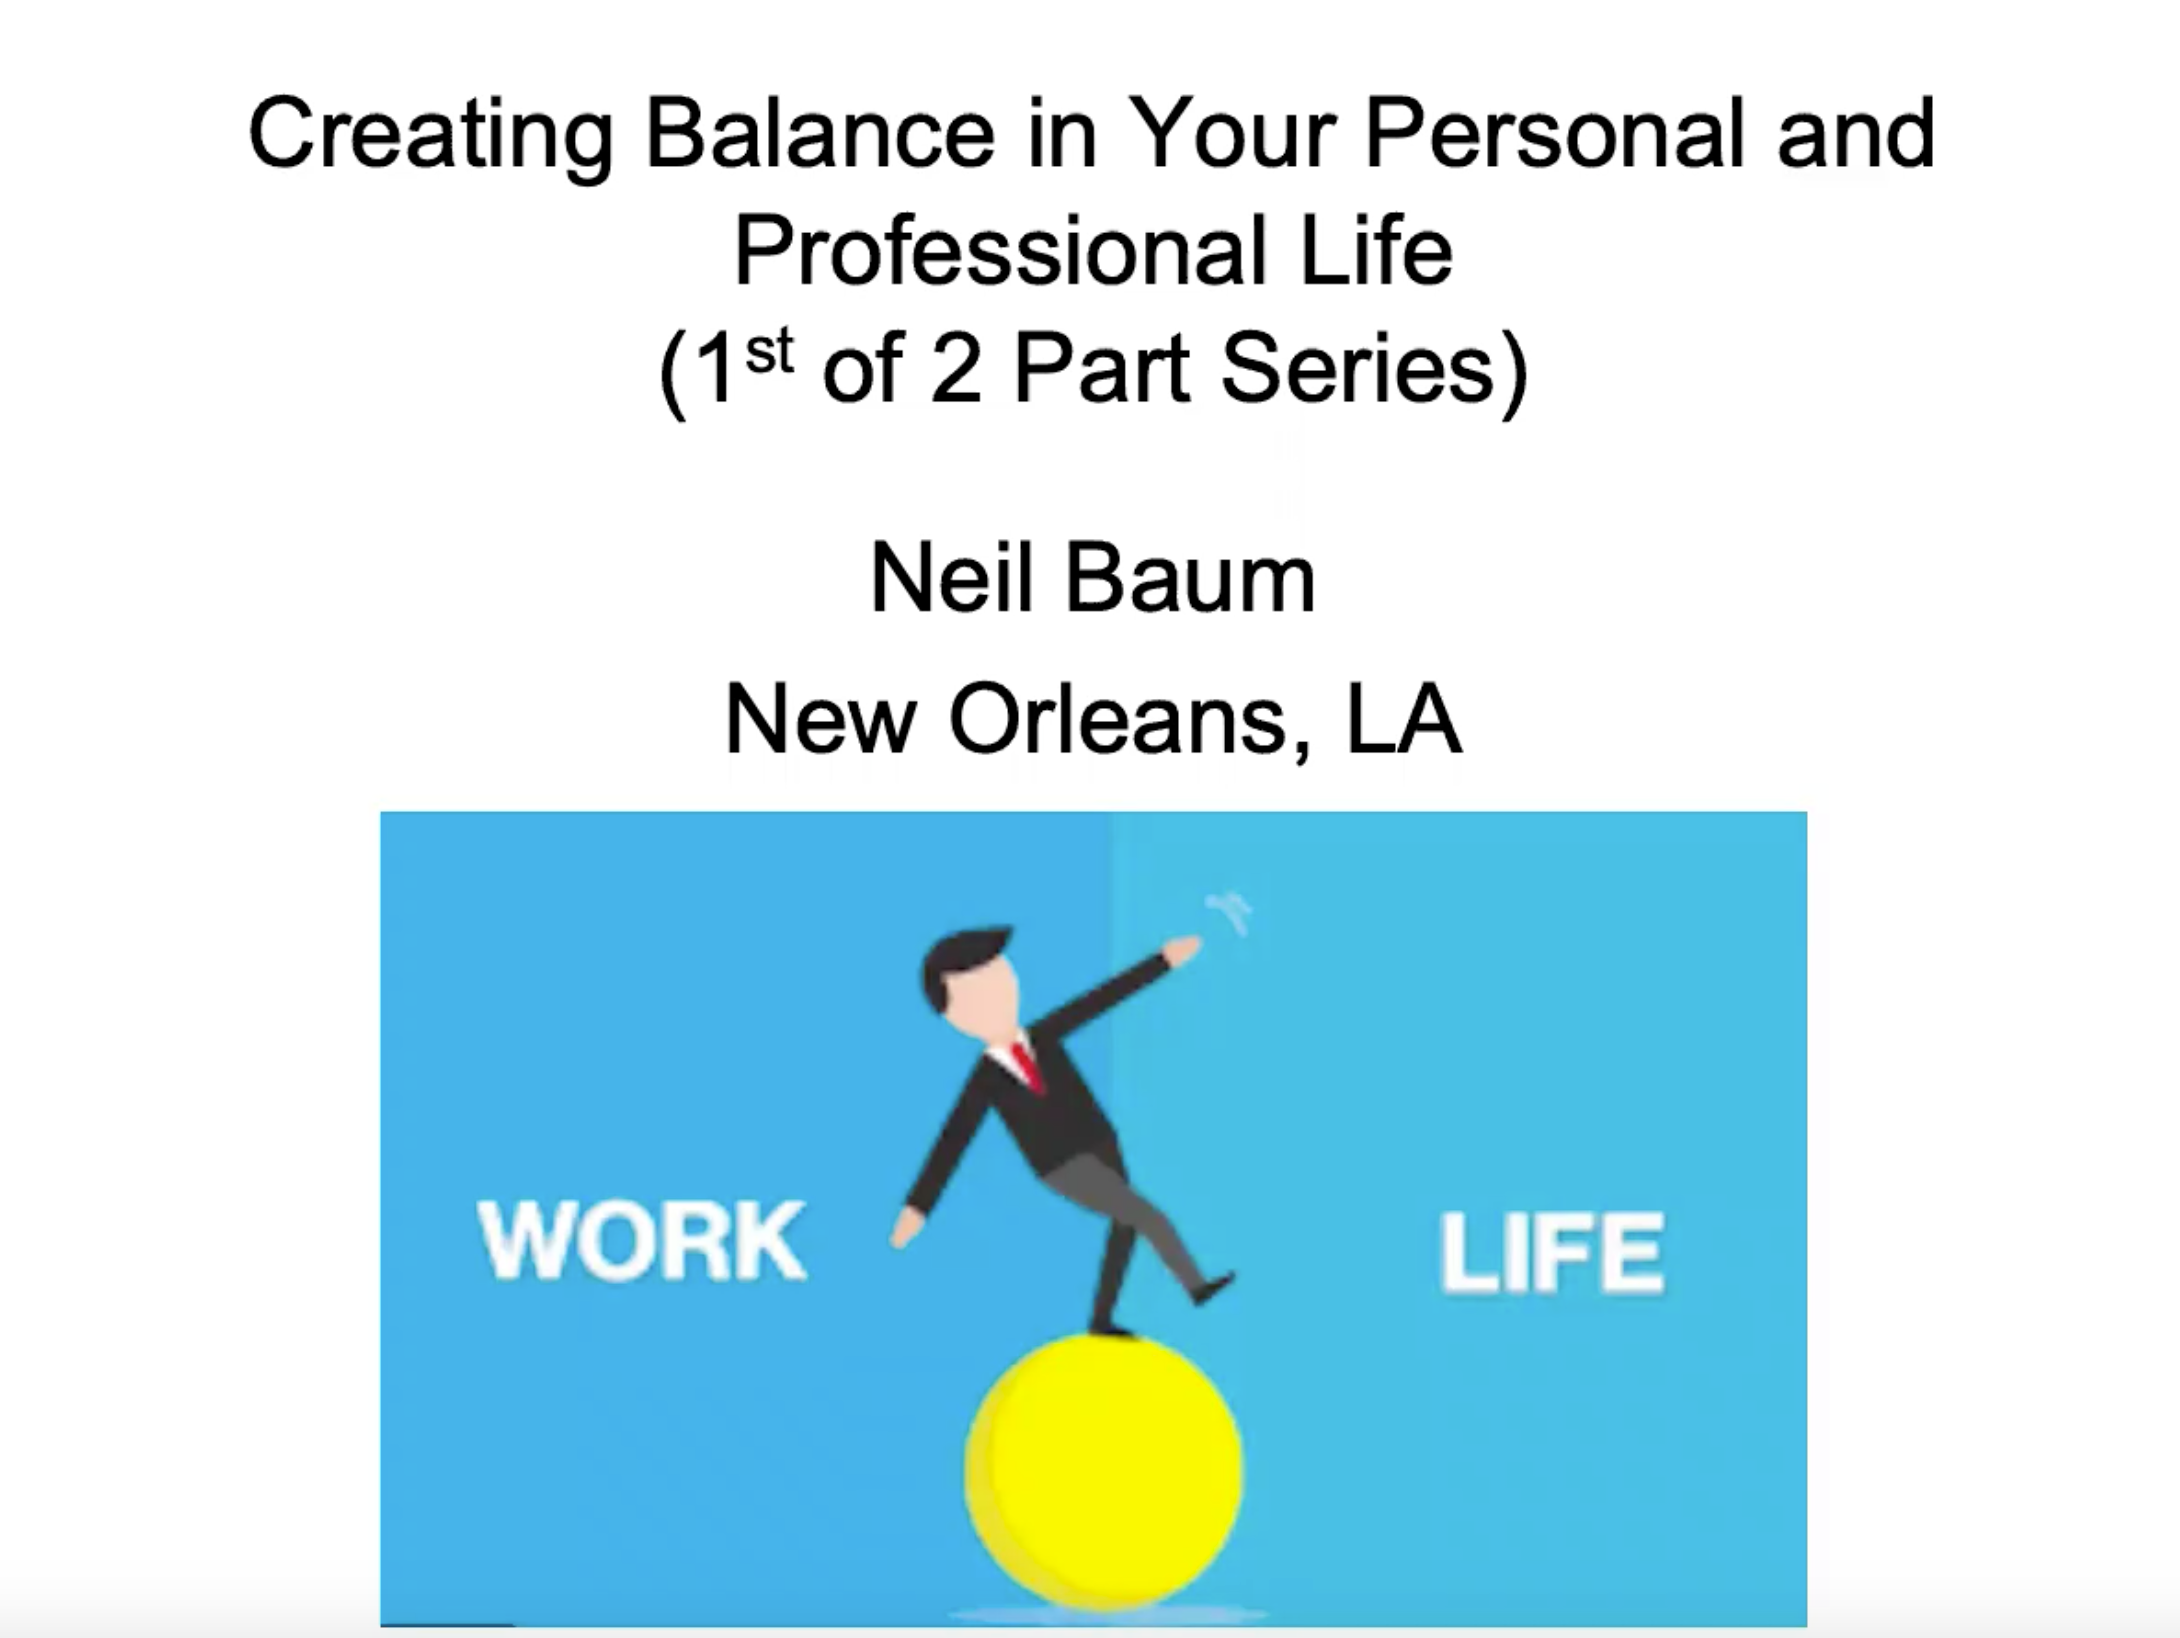 How physicians can find balance between professional and personal life